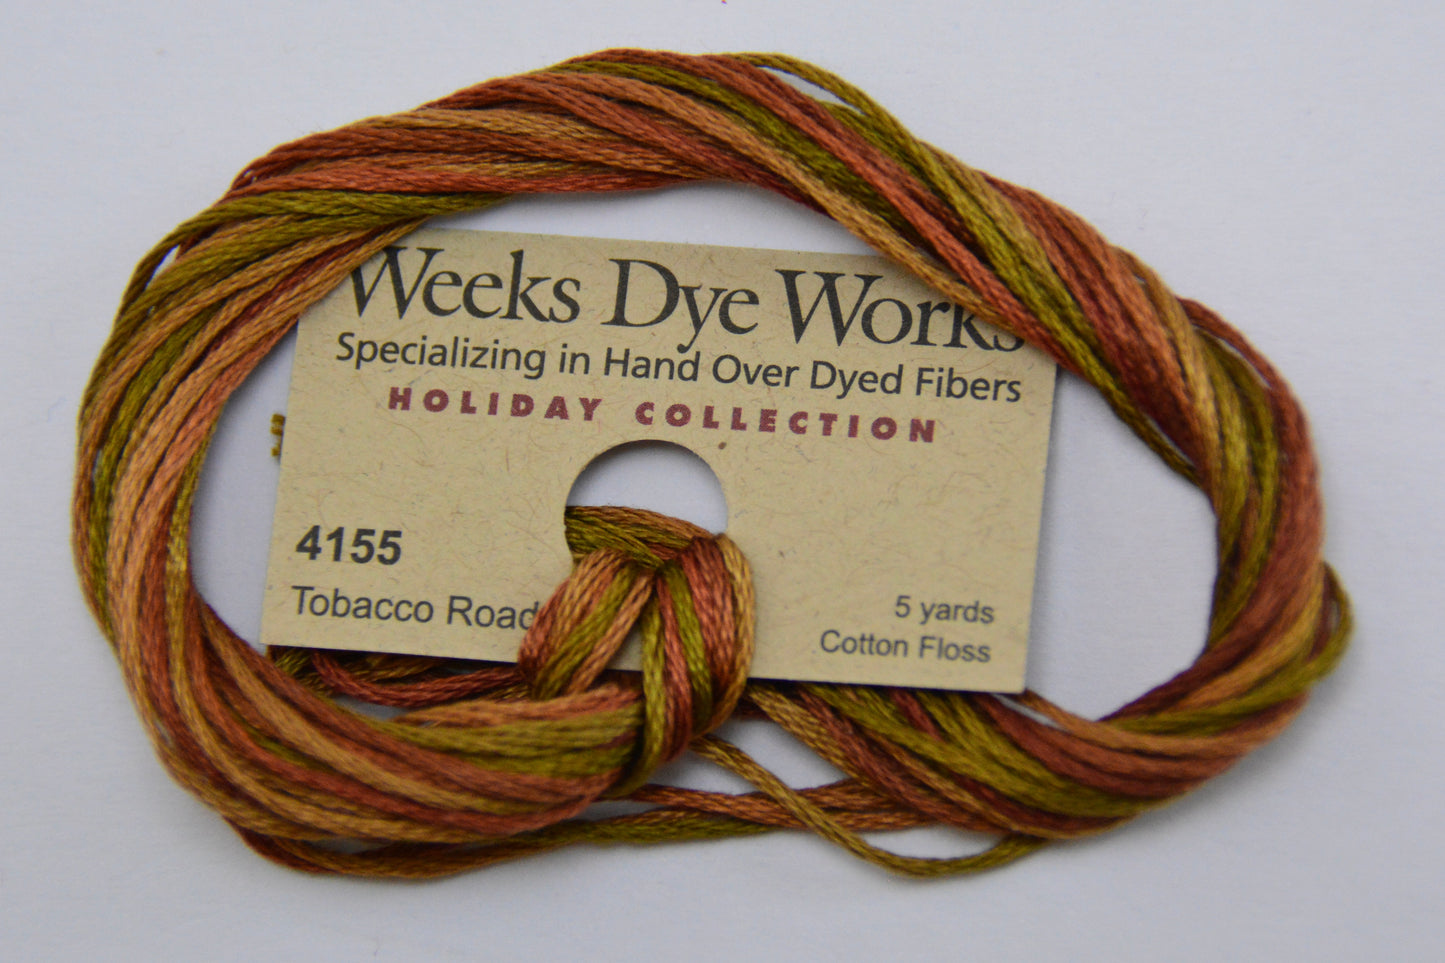 Tobacco Road 4155 Weeks Dye Works 6-Strand Hand-Dyed Embroidery Floss